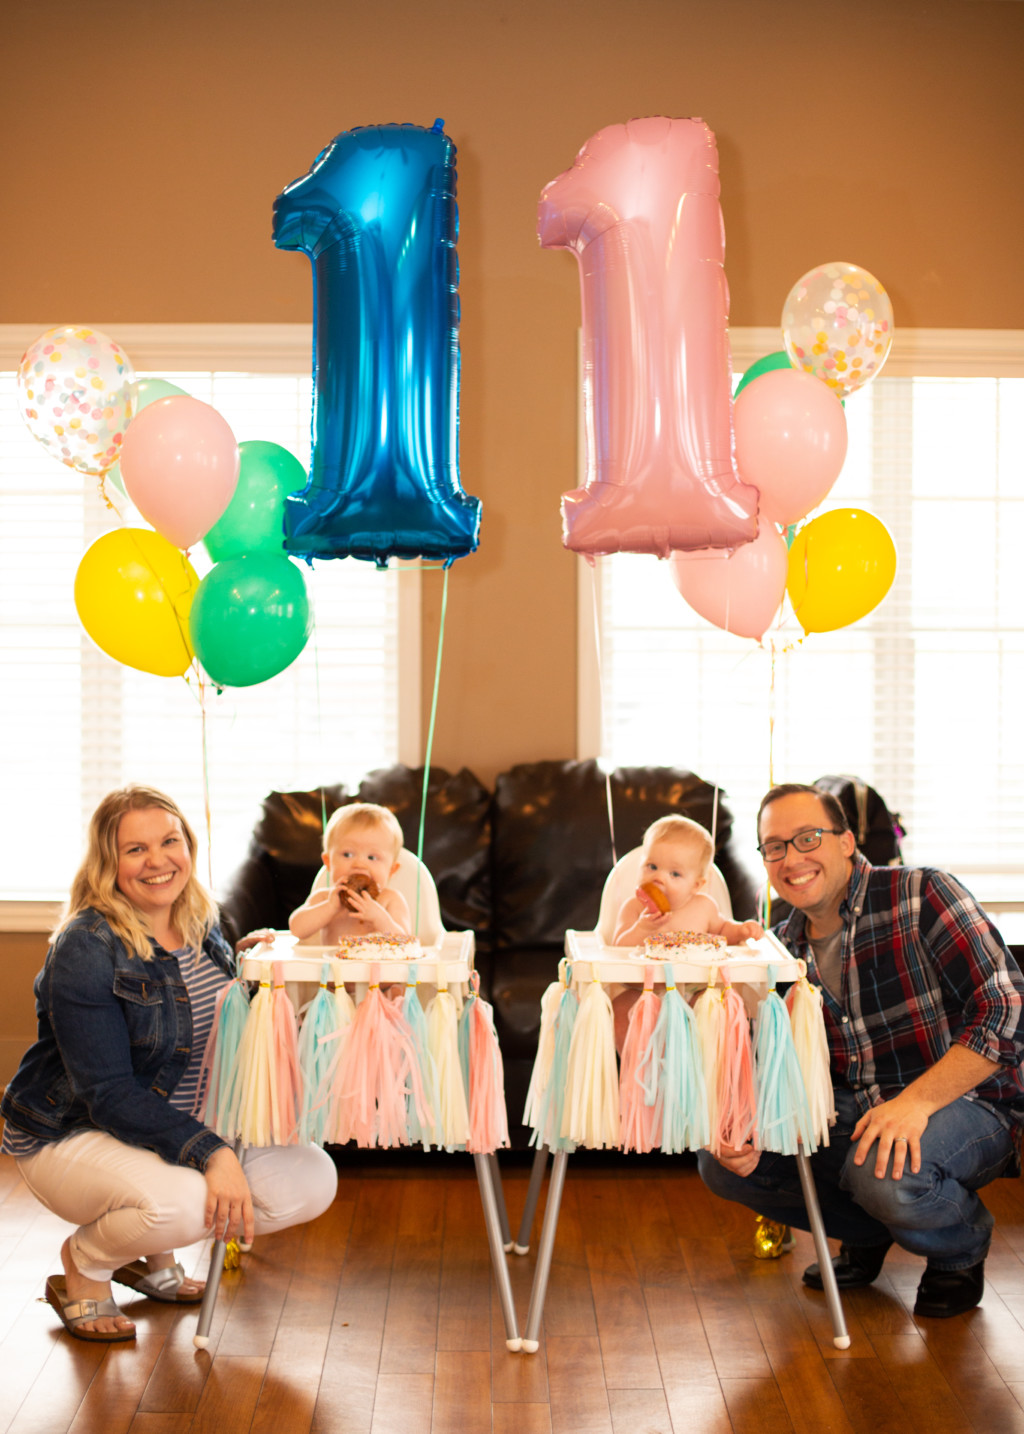 Lindsay Fischer with her husband and her IVF twins, Luke and Joey.